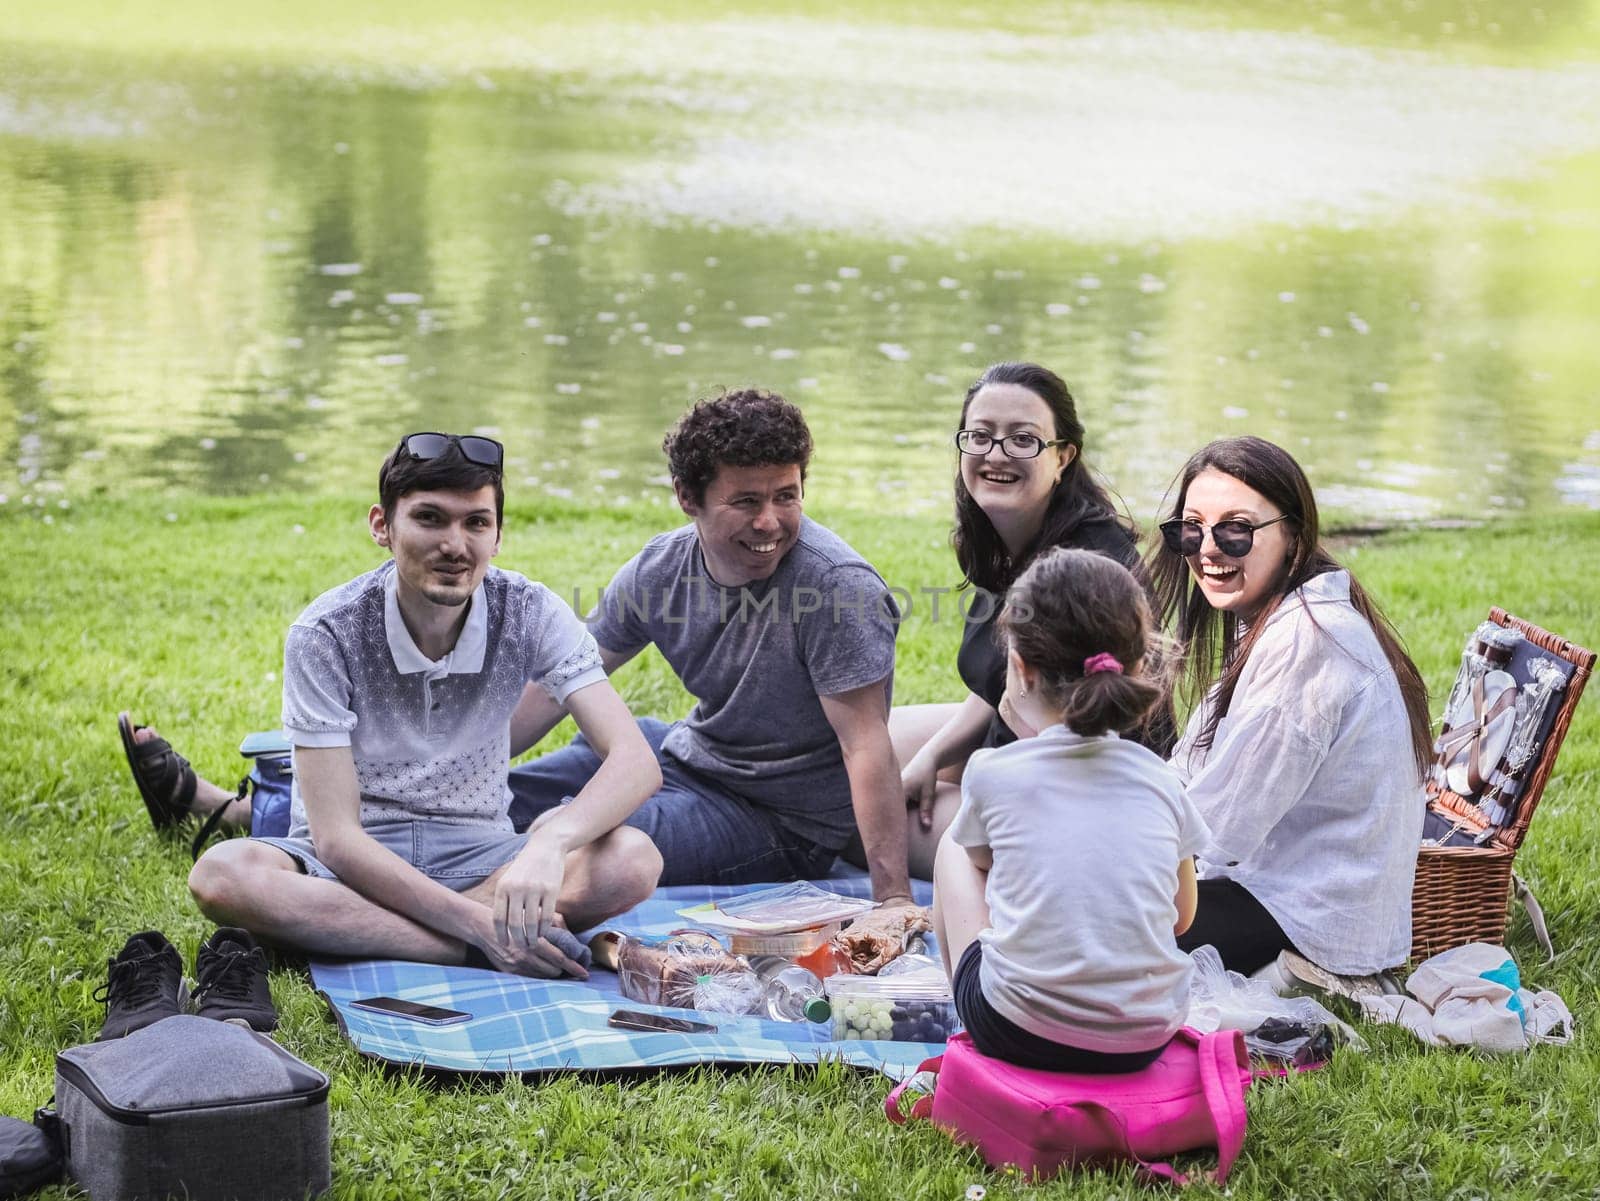 One young beautiful large Caucasian family with children sitting on a blanket with food, looking at the camera, laughing and having fun in a park near a lake on a clear sunny and spring day, close-up side view. Family picnic concept.